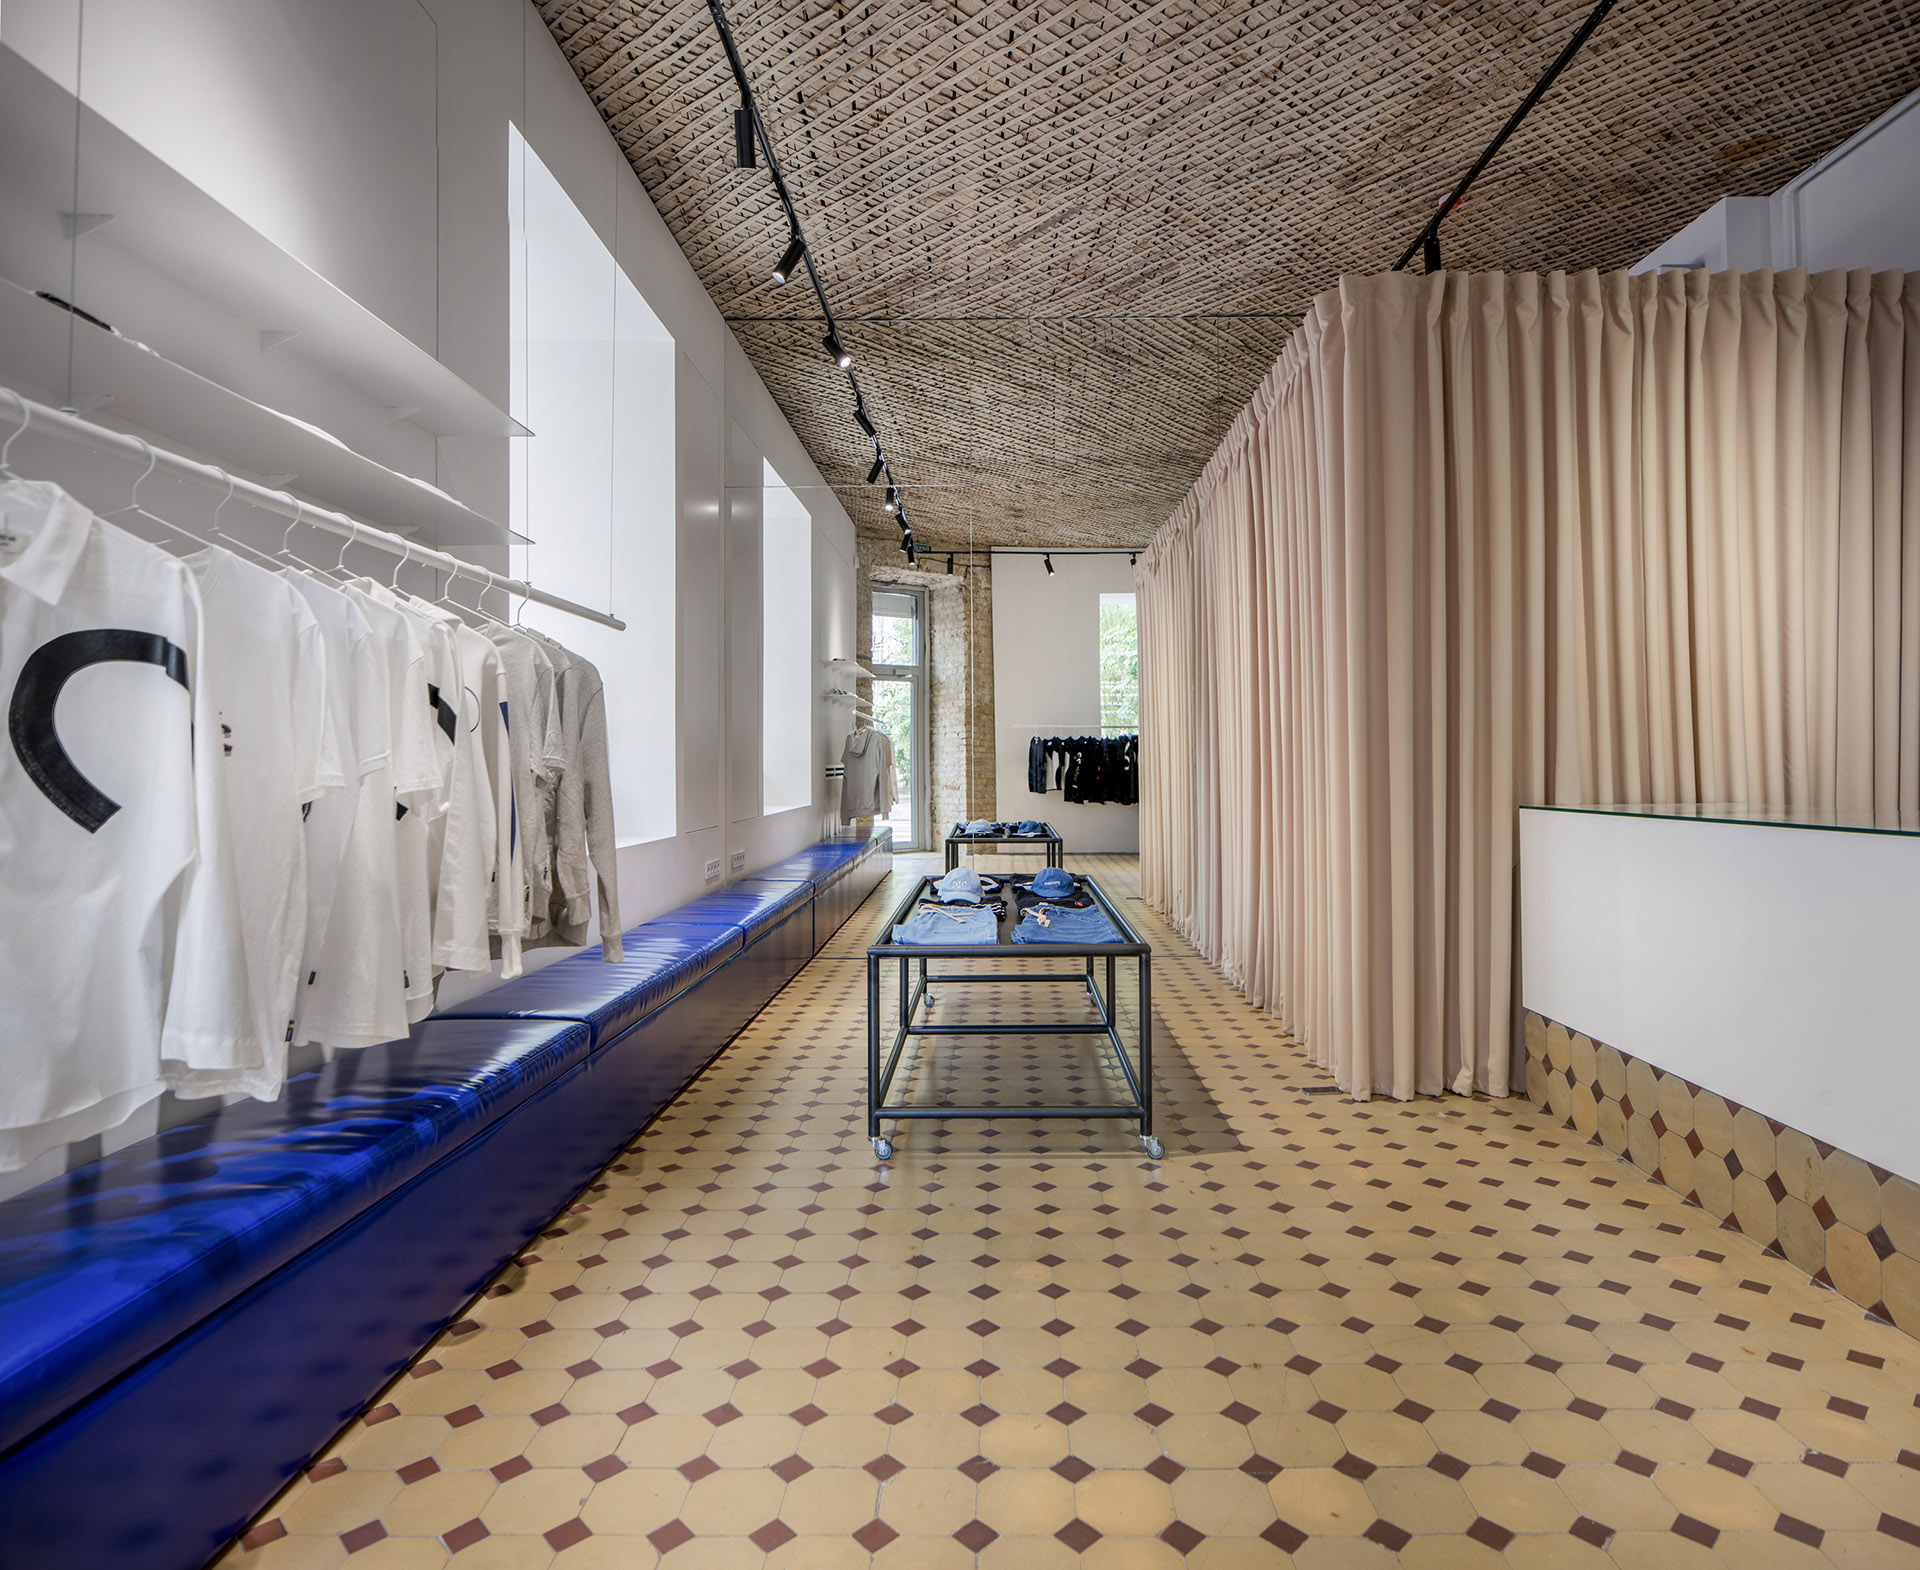 Showroom and tailoring in Kiev. Simple shapes in a historical layout with a complex geometry